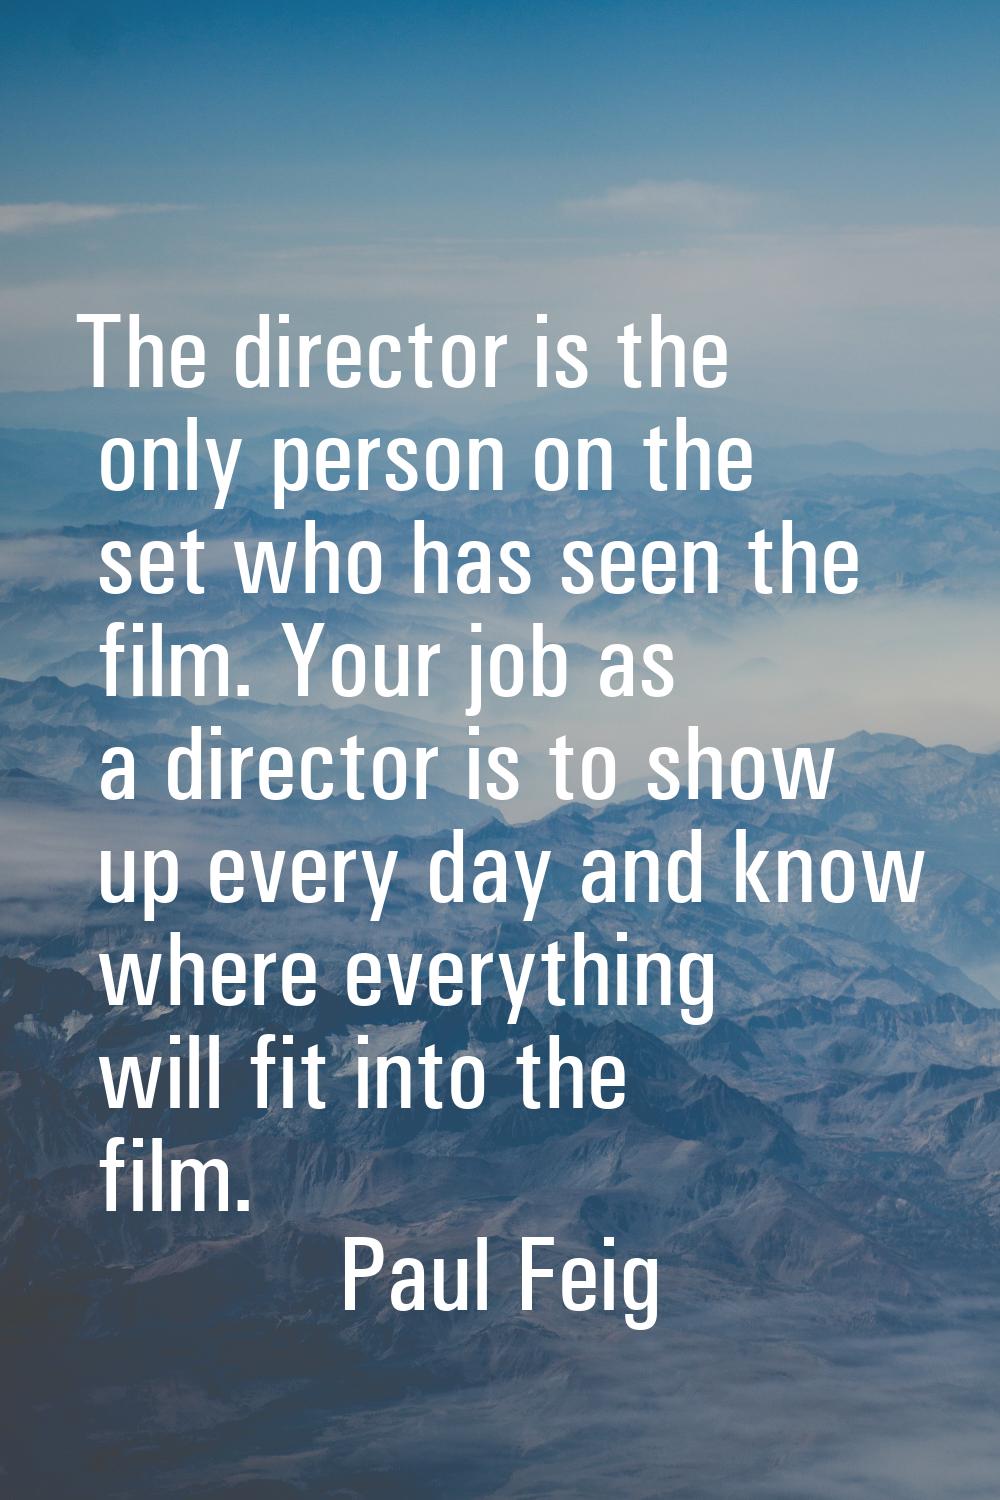 The director is the only person on the set who has seen the film. Your job as a director is to show